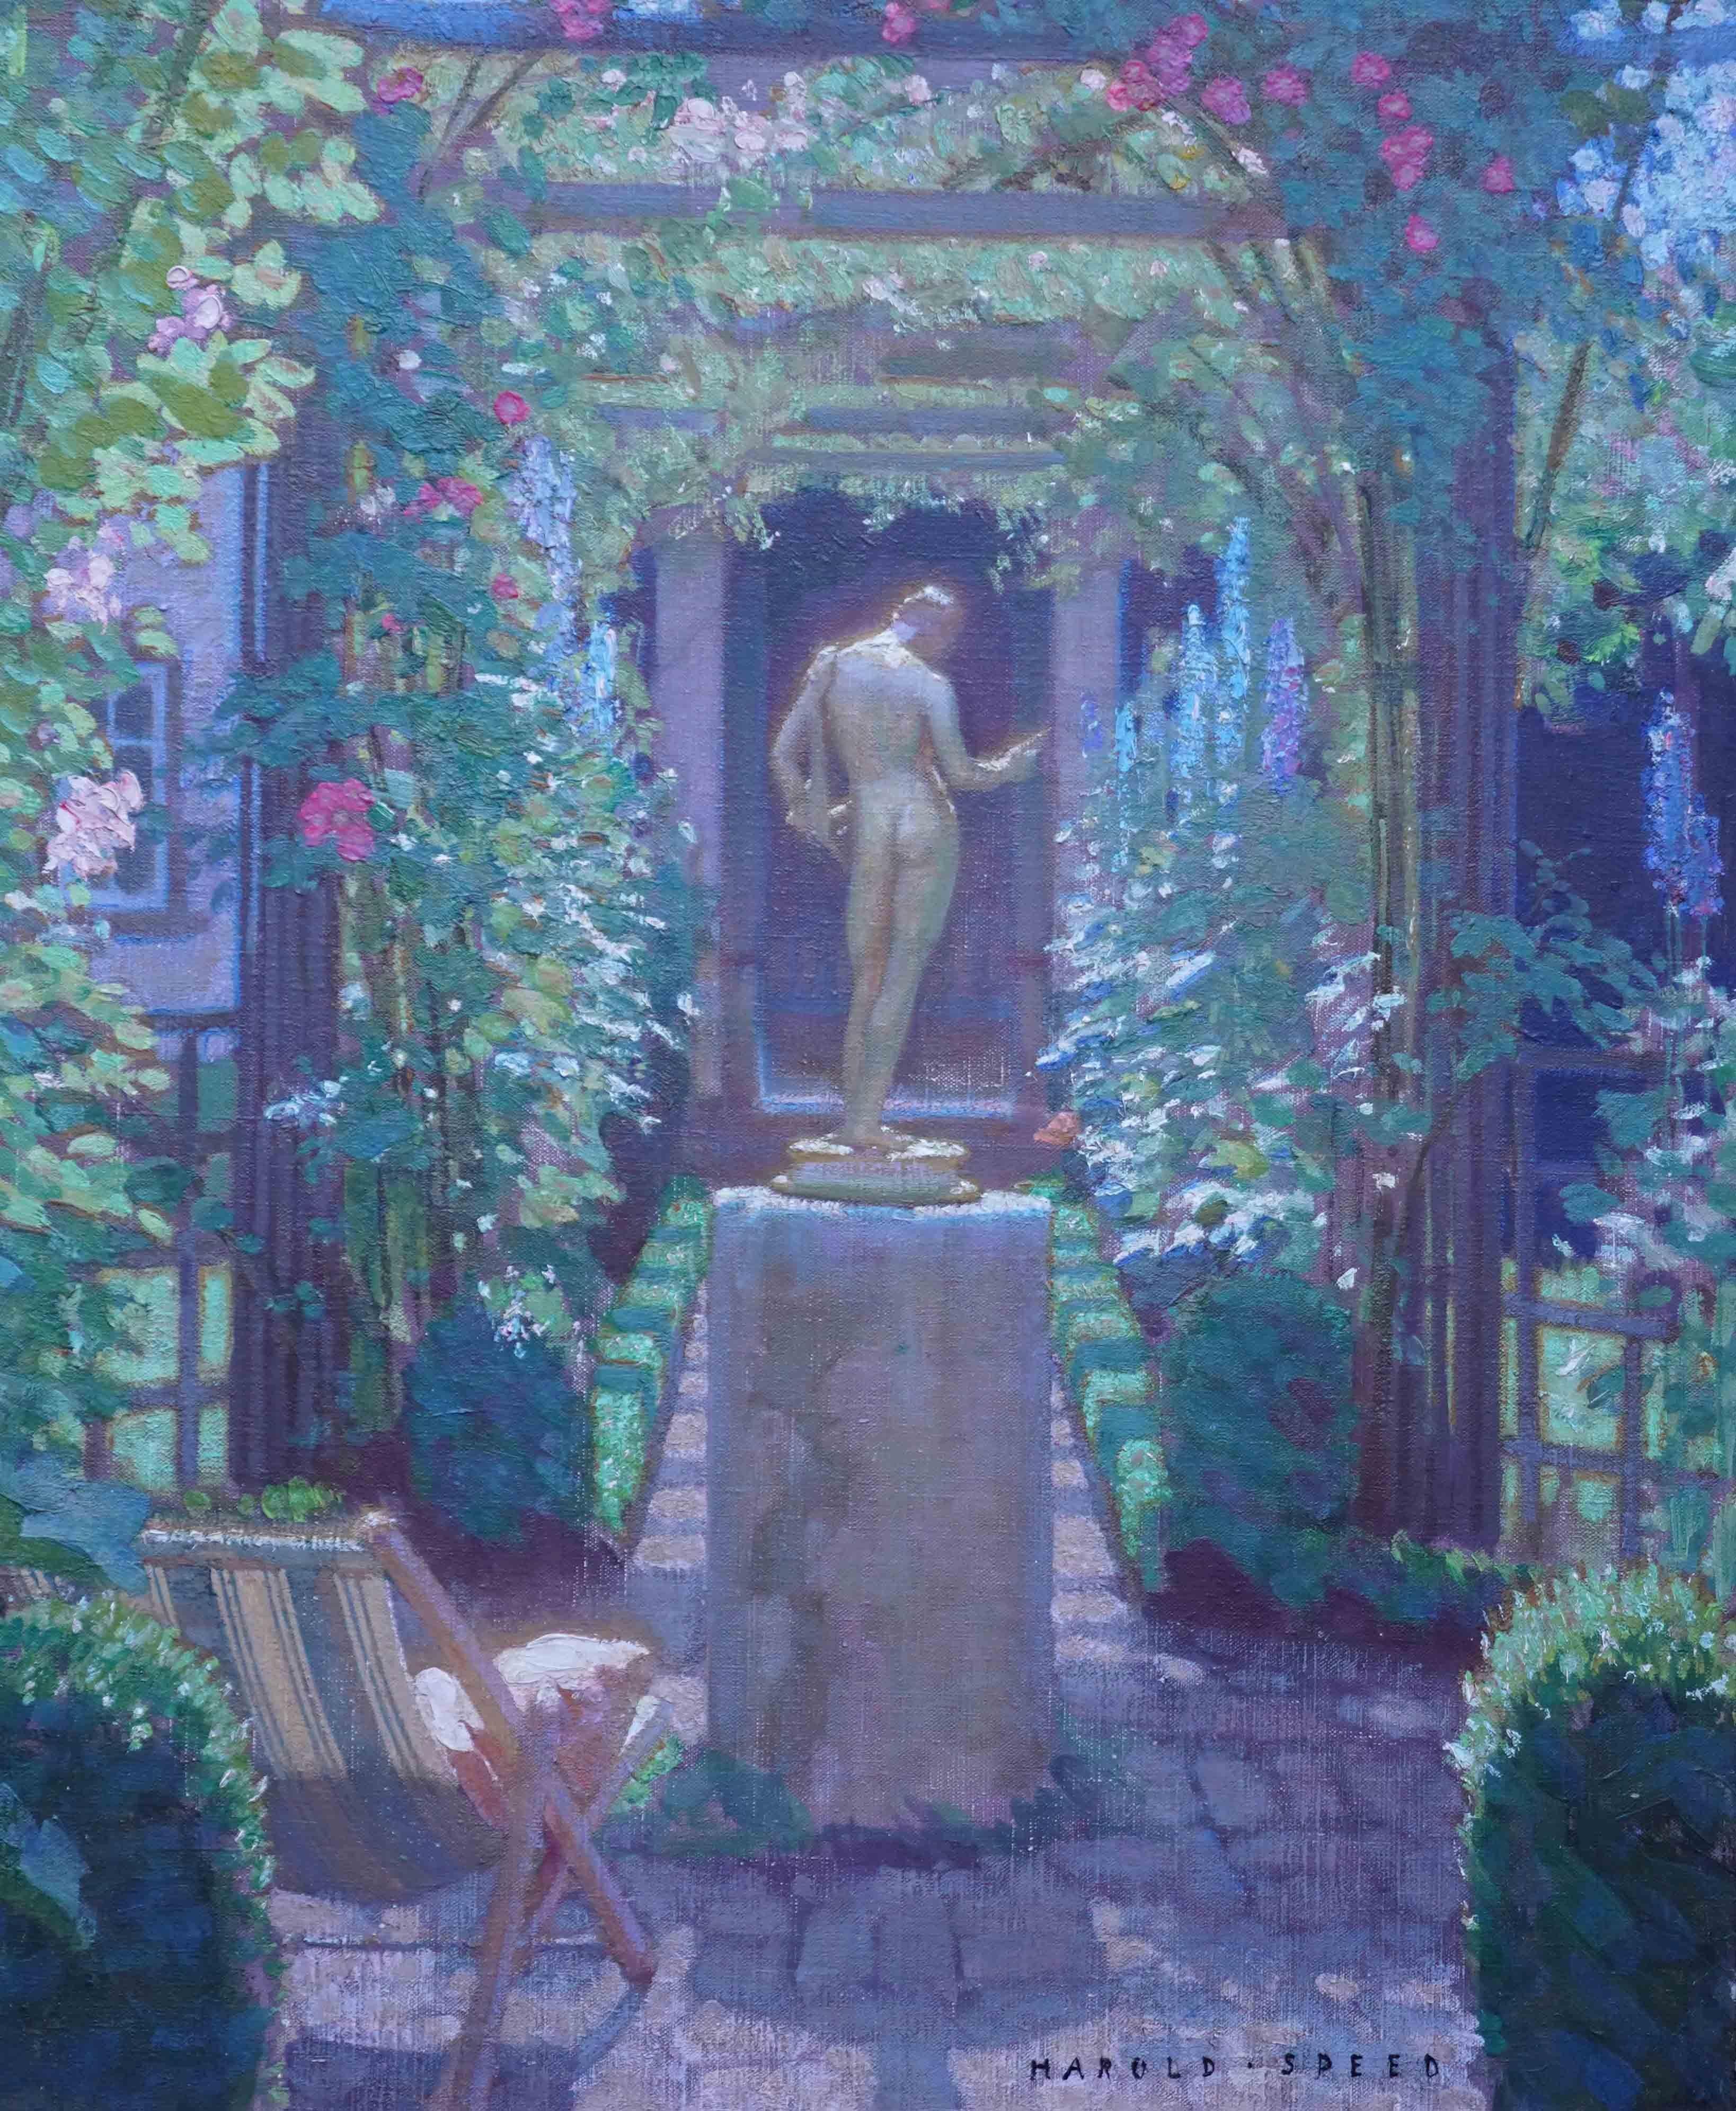 Garden with Classical Statue - British 1930's art gardenscape oil painting 8